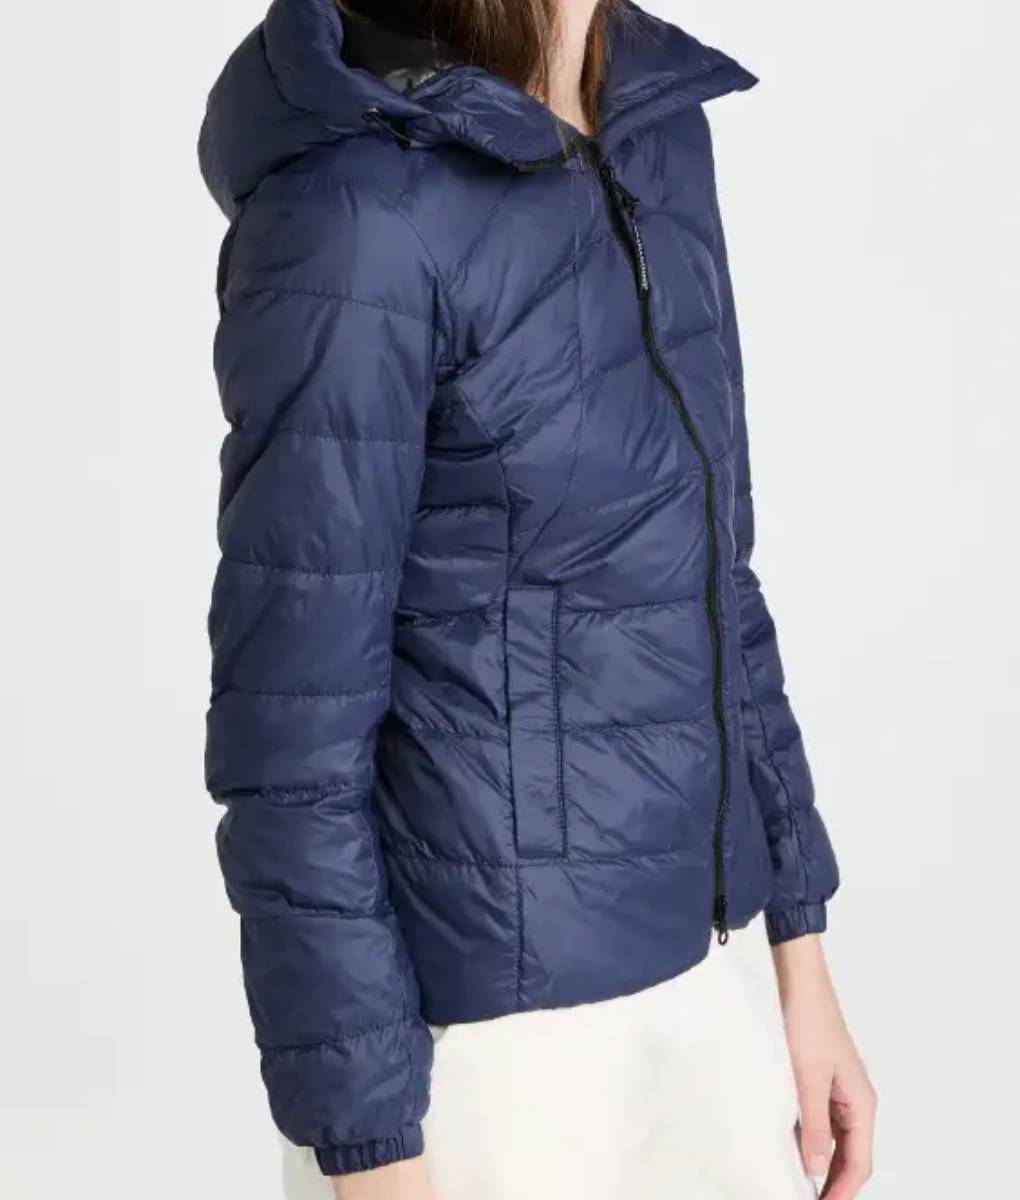 Josephine The Other Zoey Blue Puffer Jacket (5)